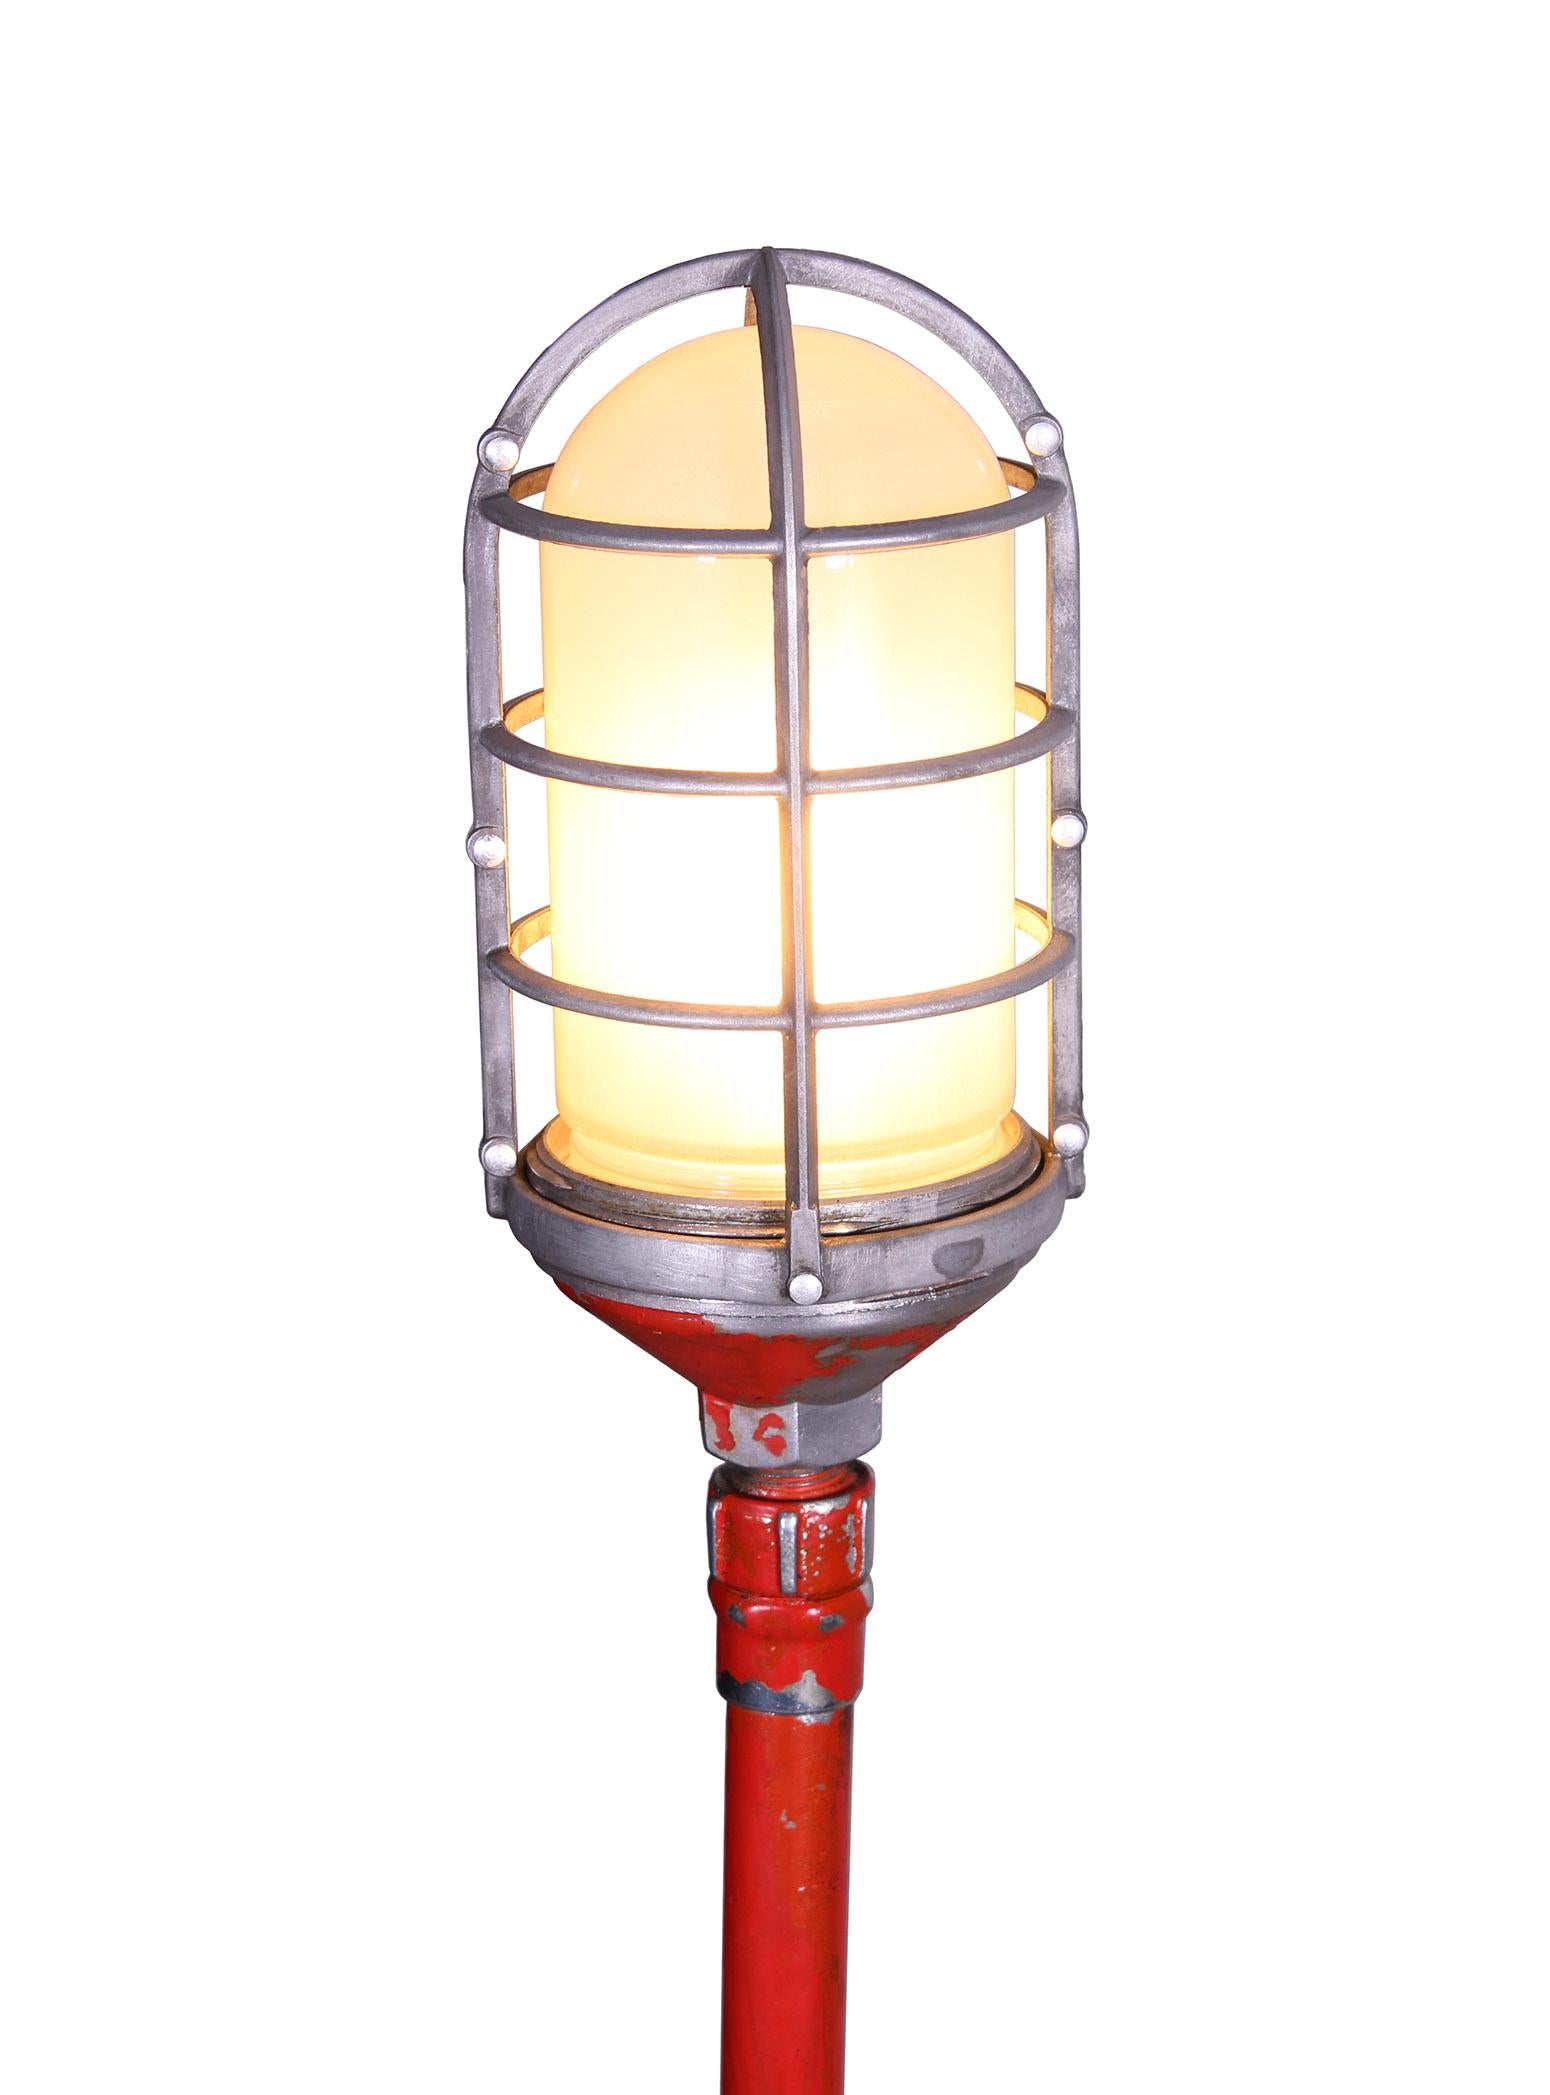 Vintage industrial, Gothic, theater stage floor lamp, ghost light, made with an explosion proof bulb housing, steel pole and cast iron stand. Fitted with Edison bulb. Distressed faded red paint.